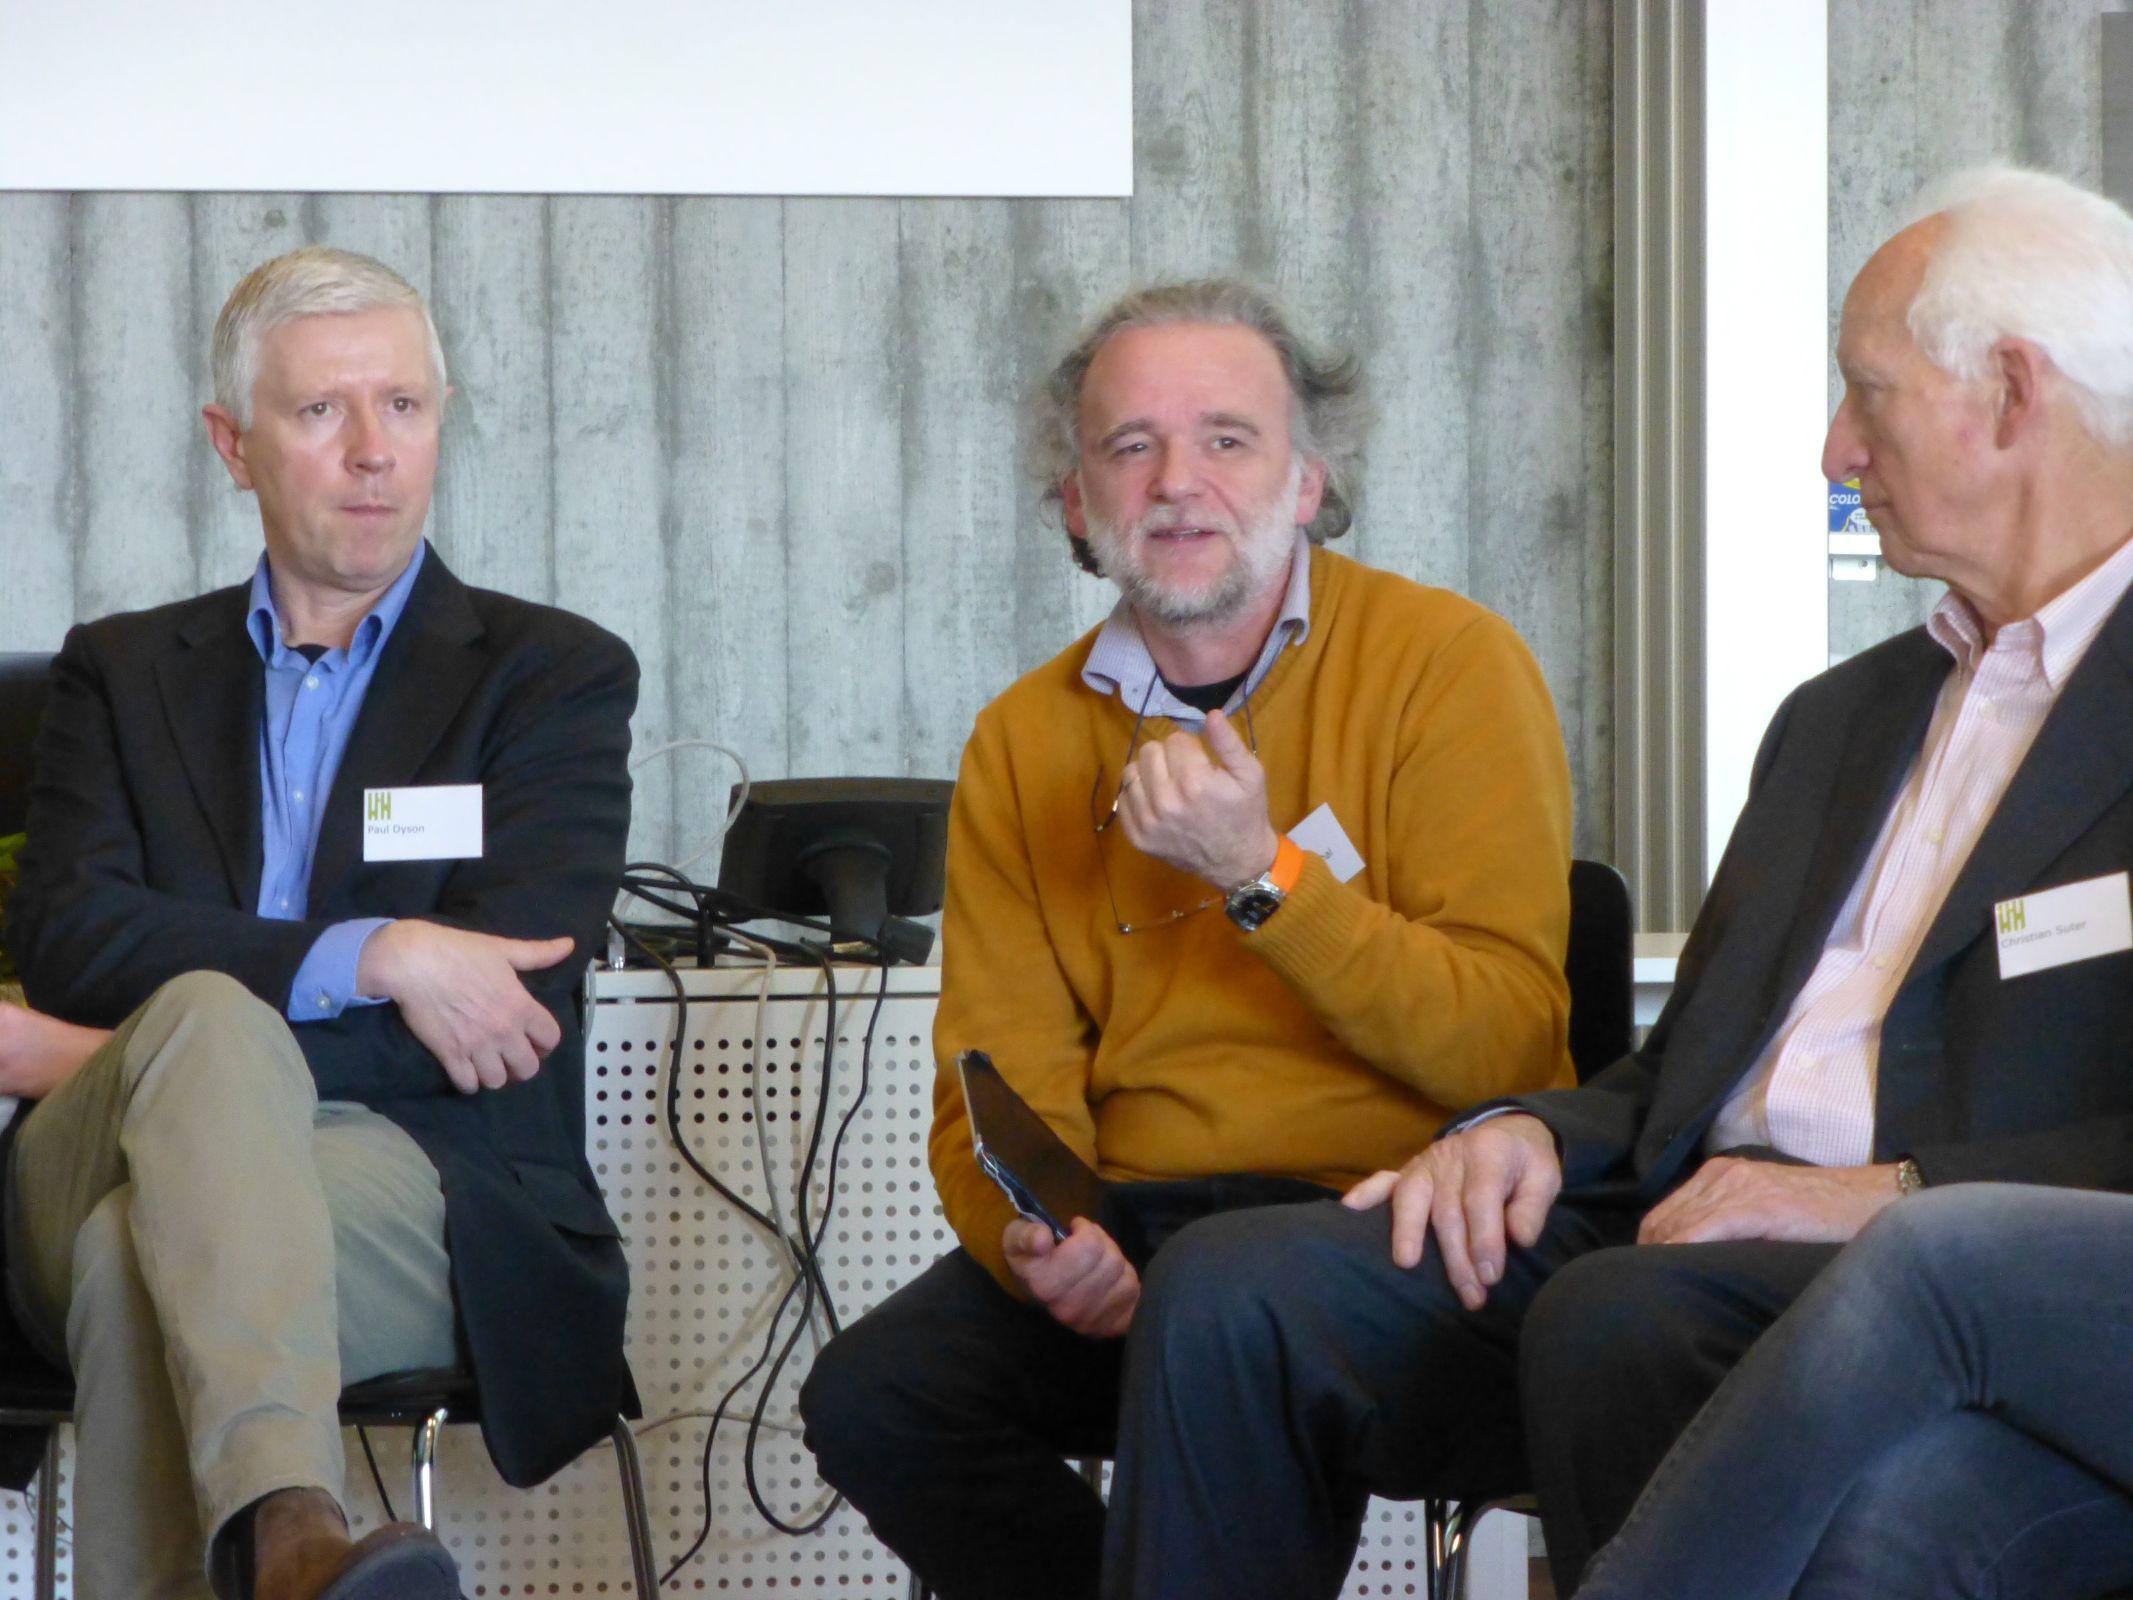 (from left to right) Paul Dyson (EPFL), François Maréchal (EPFL) and Christian Suter (SATW) during the panel discussion